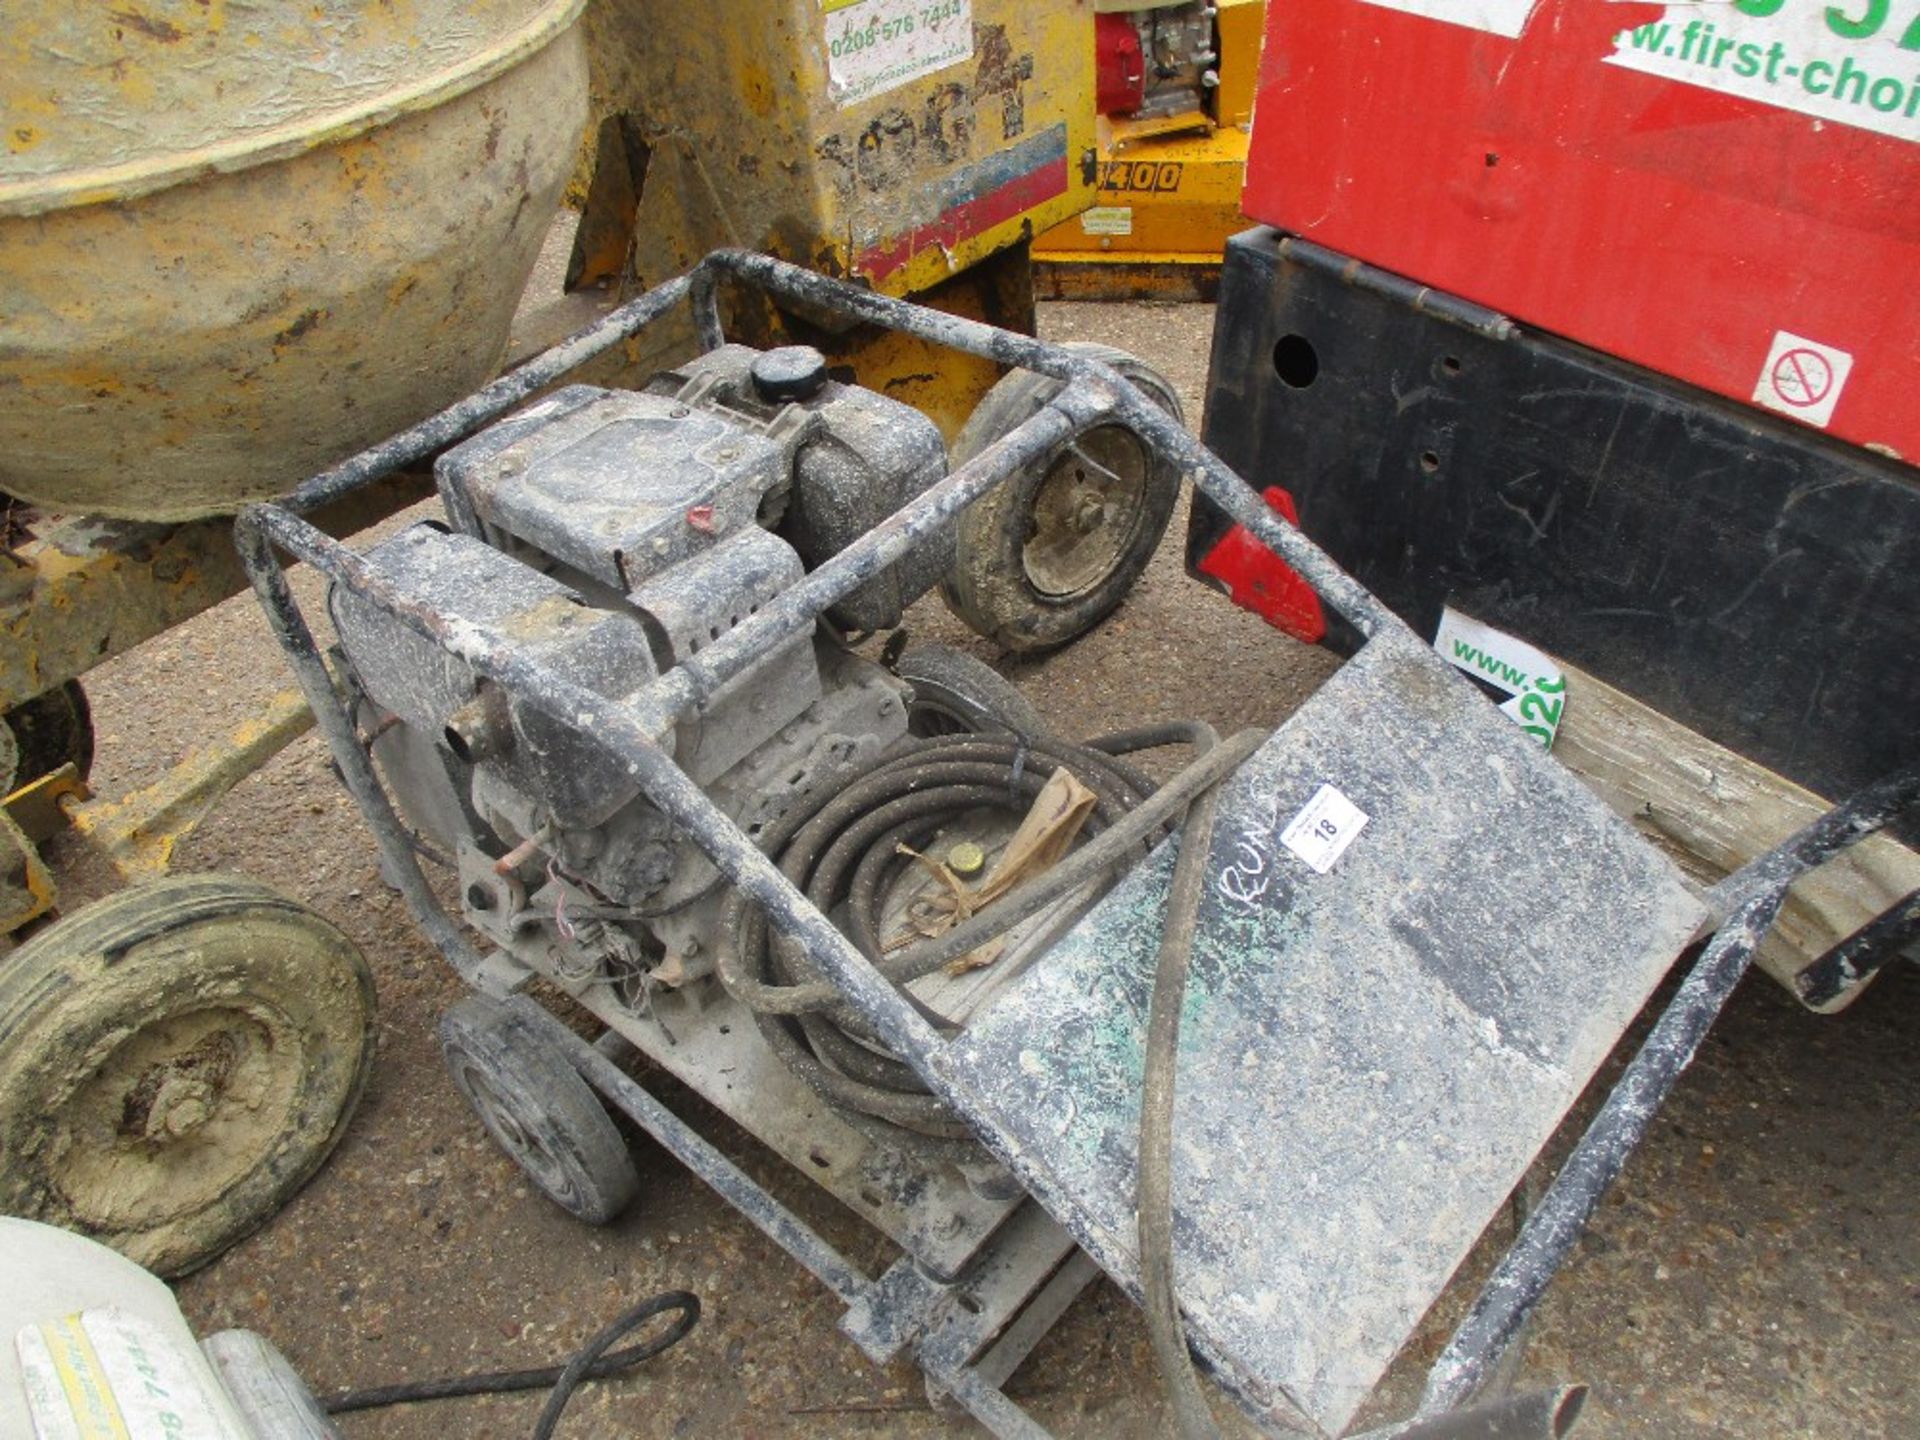 DIESEL ENGINED PRESSURE WASHER BARROW. WHEN TESTED WAS SEEN TO RUN BUT PUMP NOT TESTED..NO WATER